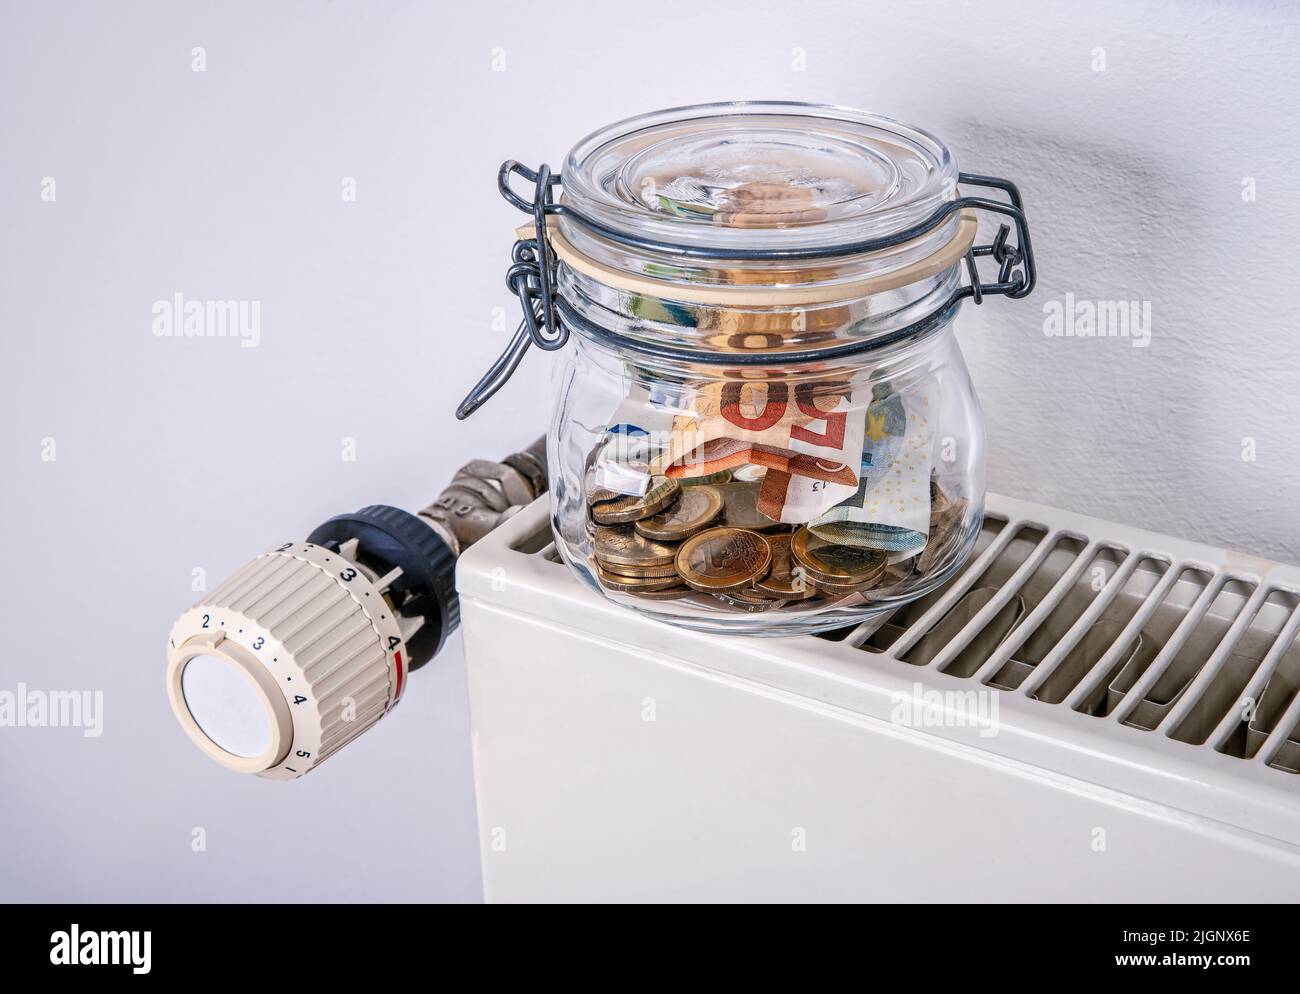 Saving for heating: radiator and thermostat with piggy bank and money Stock Photo